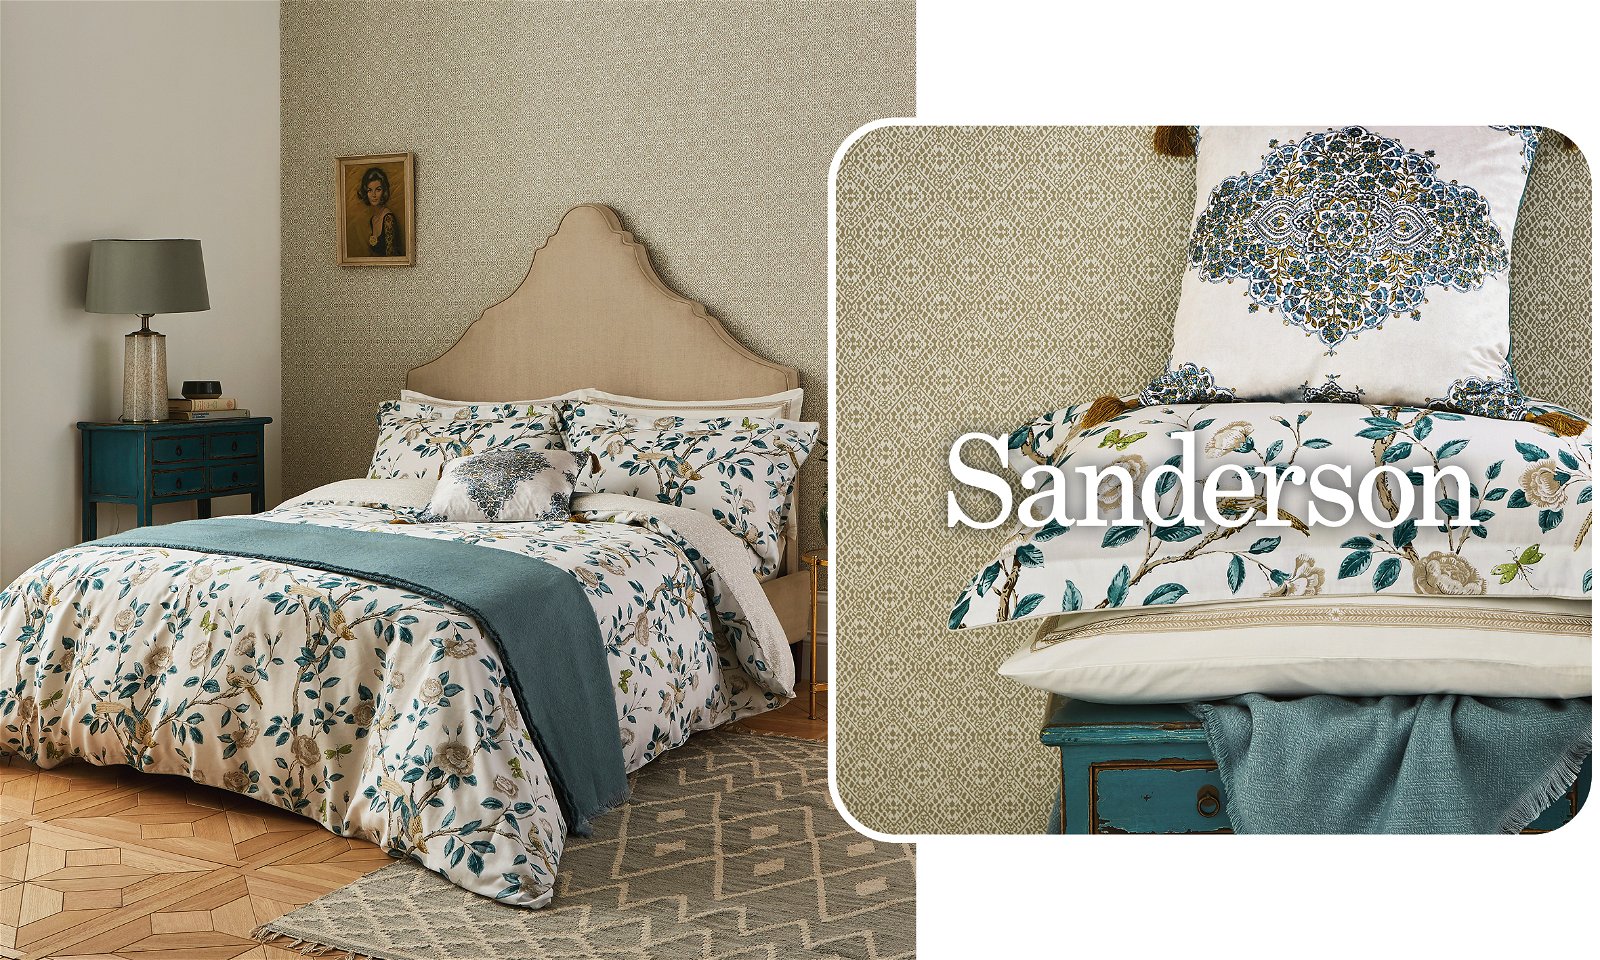 Sanderson Andhara Bedding in Teal & Cream